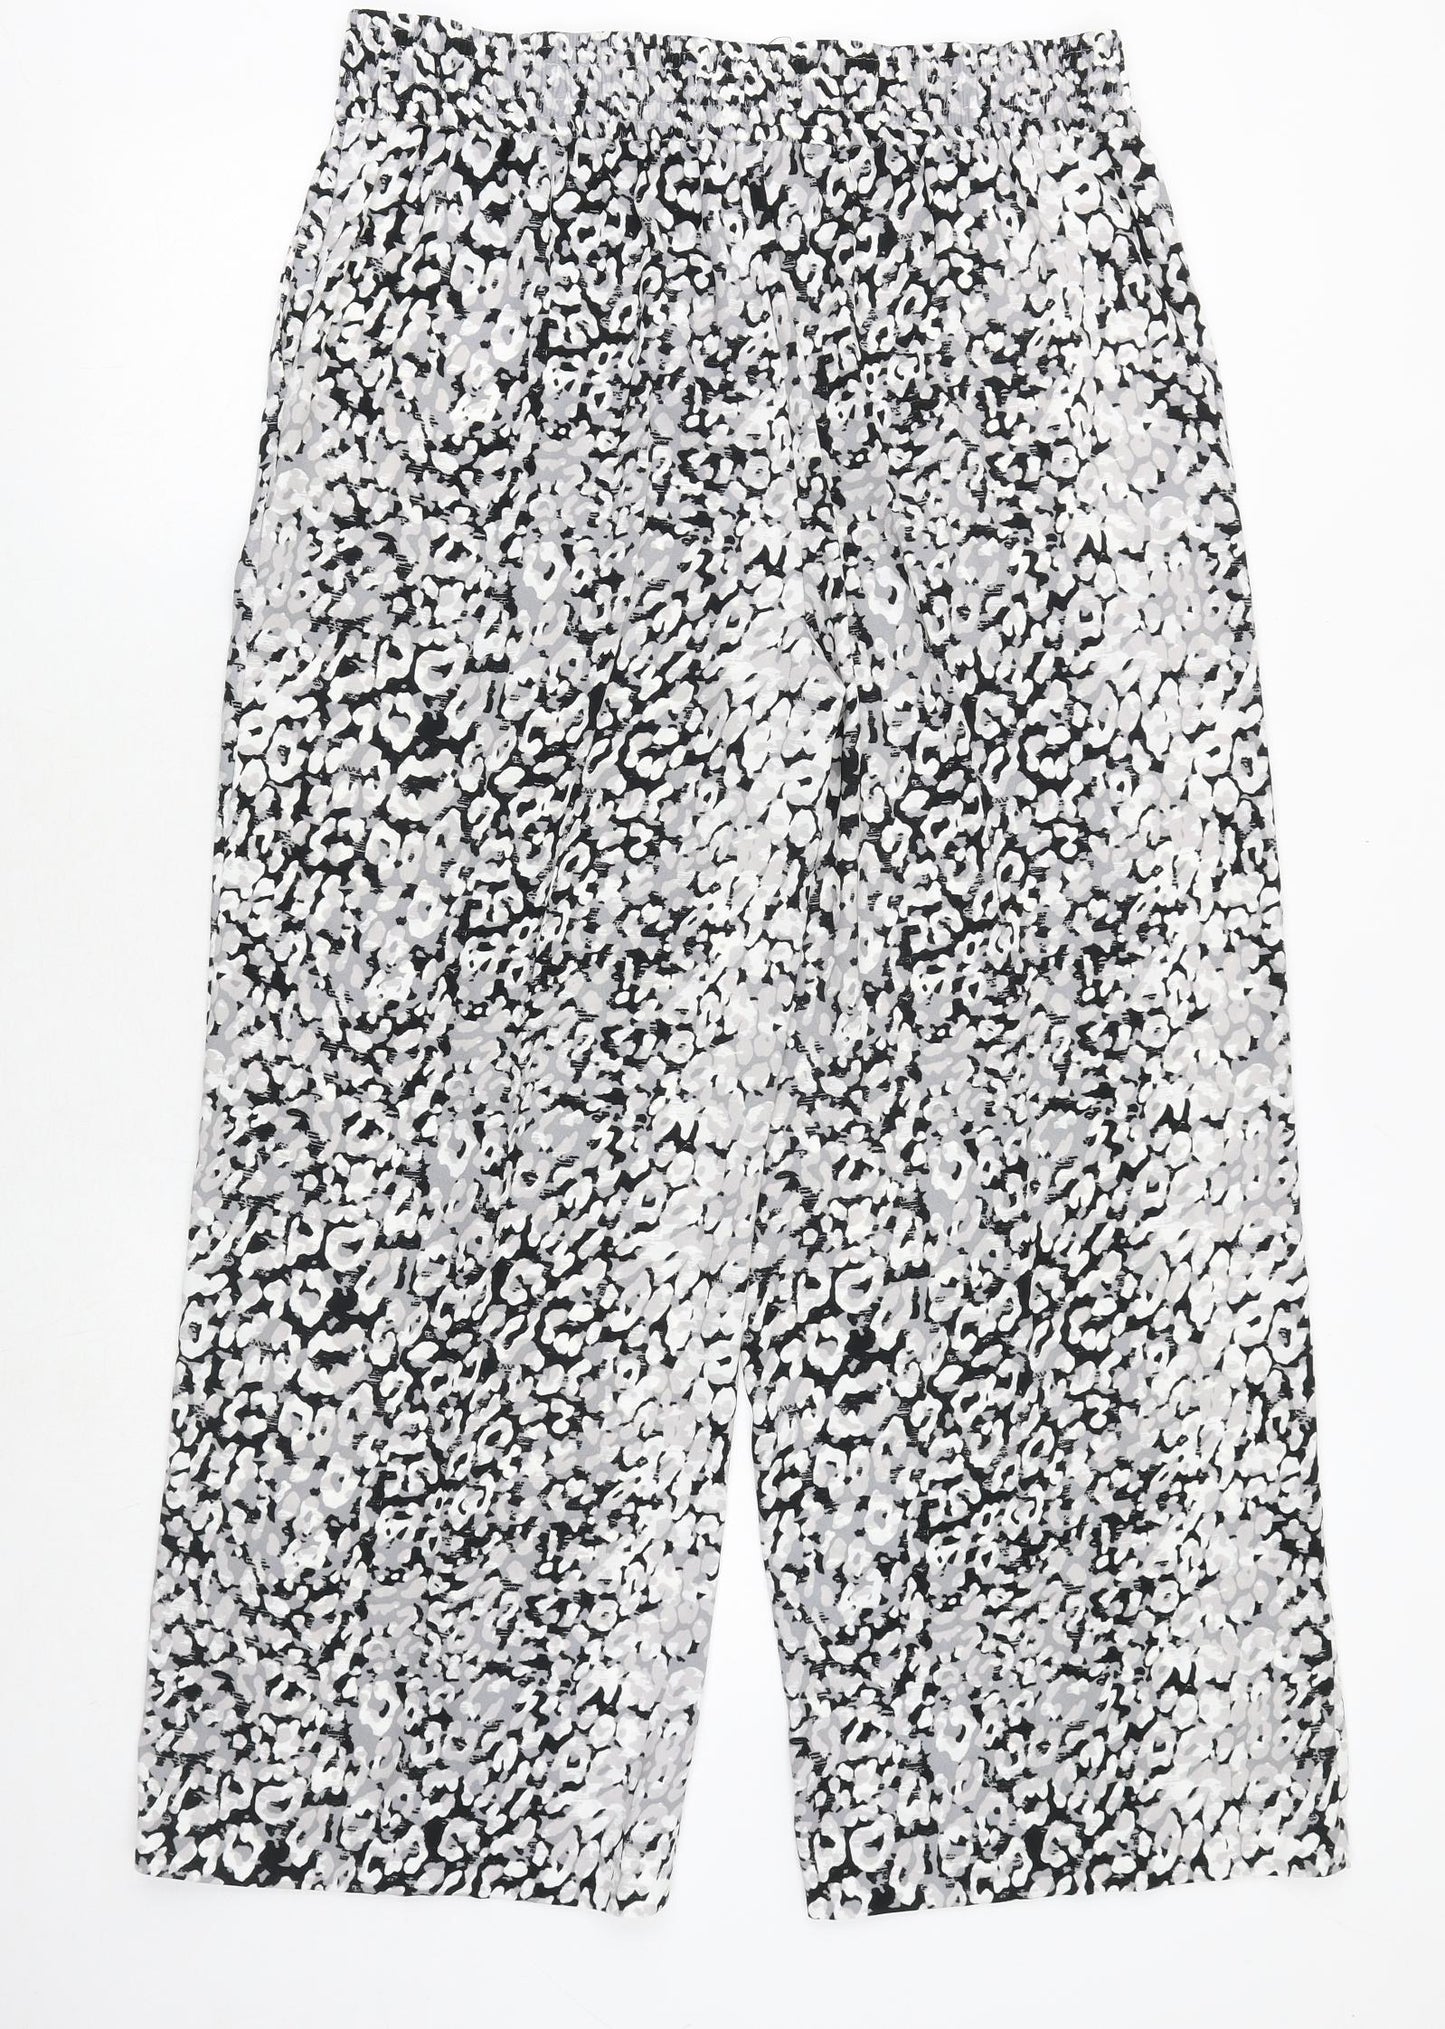 Marks and Spencer Womens Grey Animal Print Polyester Trousers Size 16 Regular Tie - Leopard Pattern